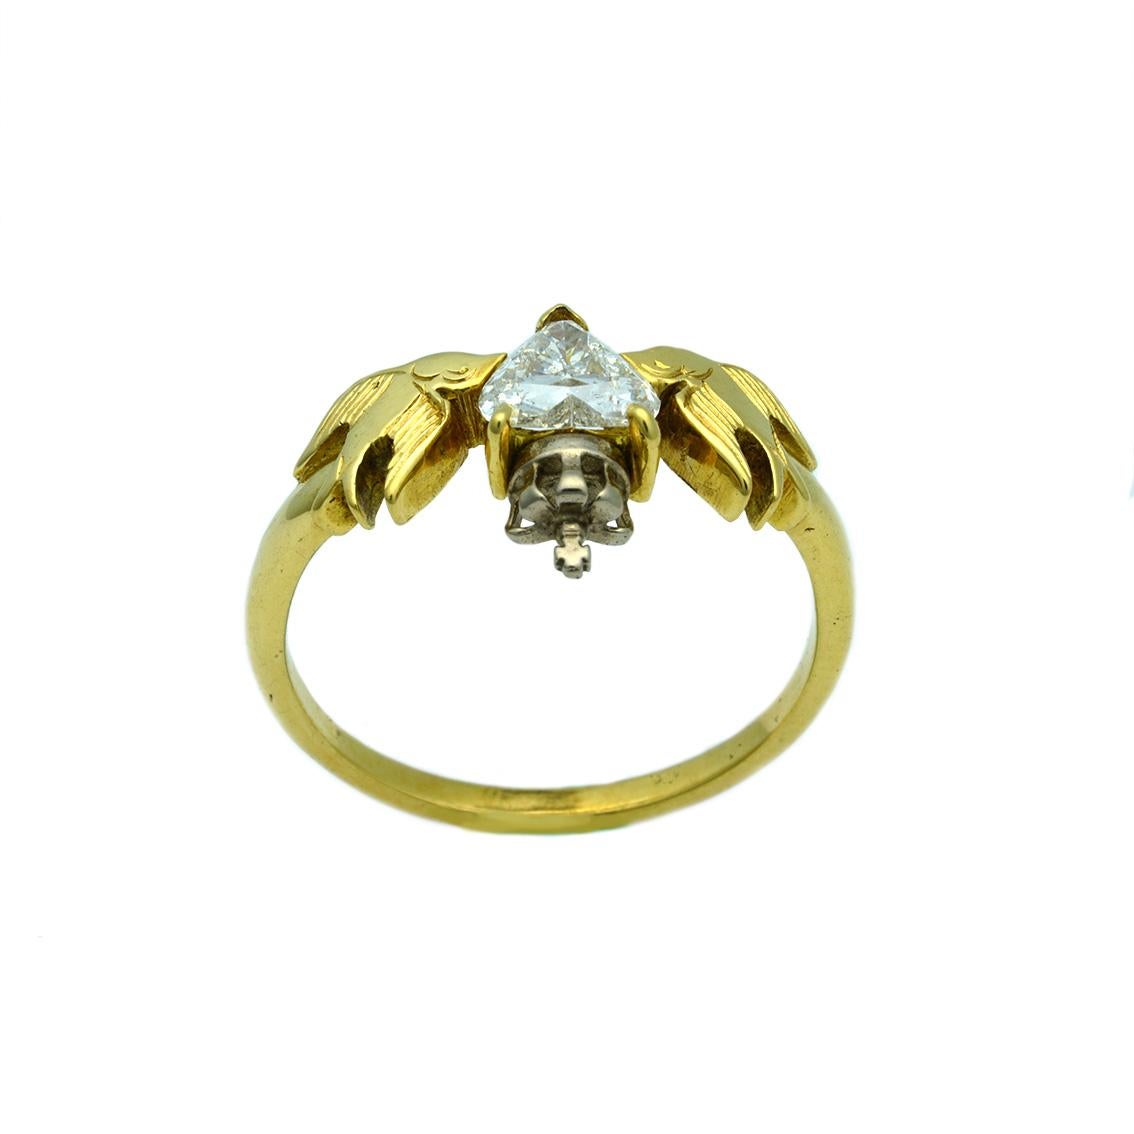 Contemporary William Llewellyn Griffiths Diamond Crowned Heart and Swallows Ring